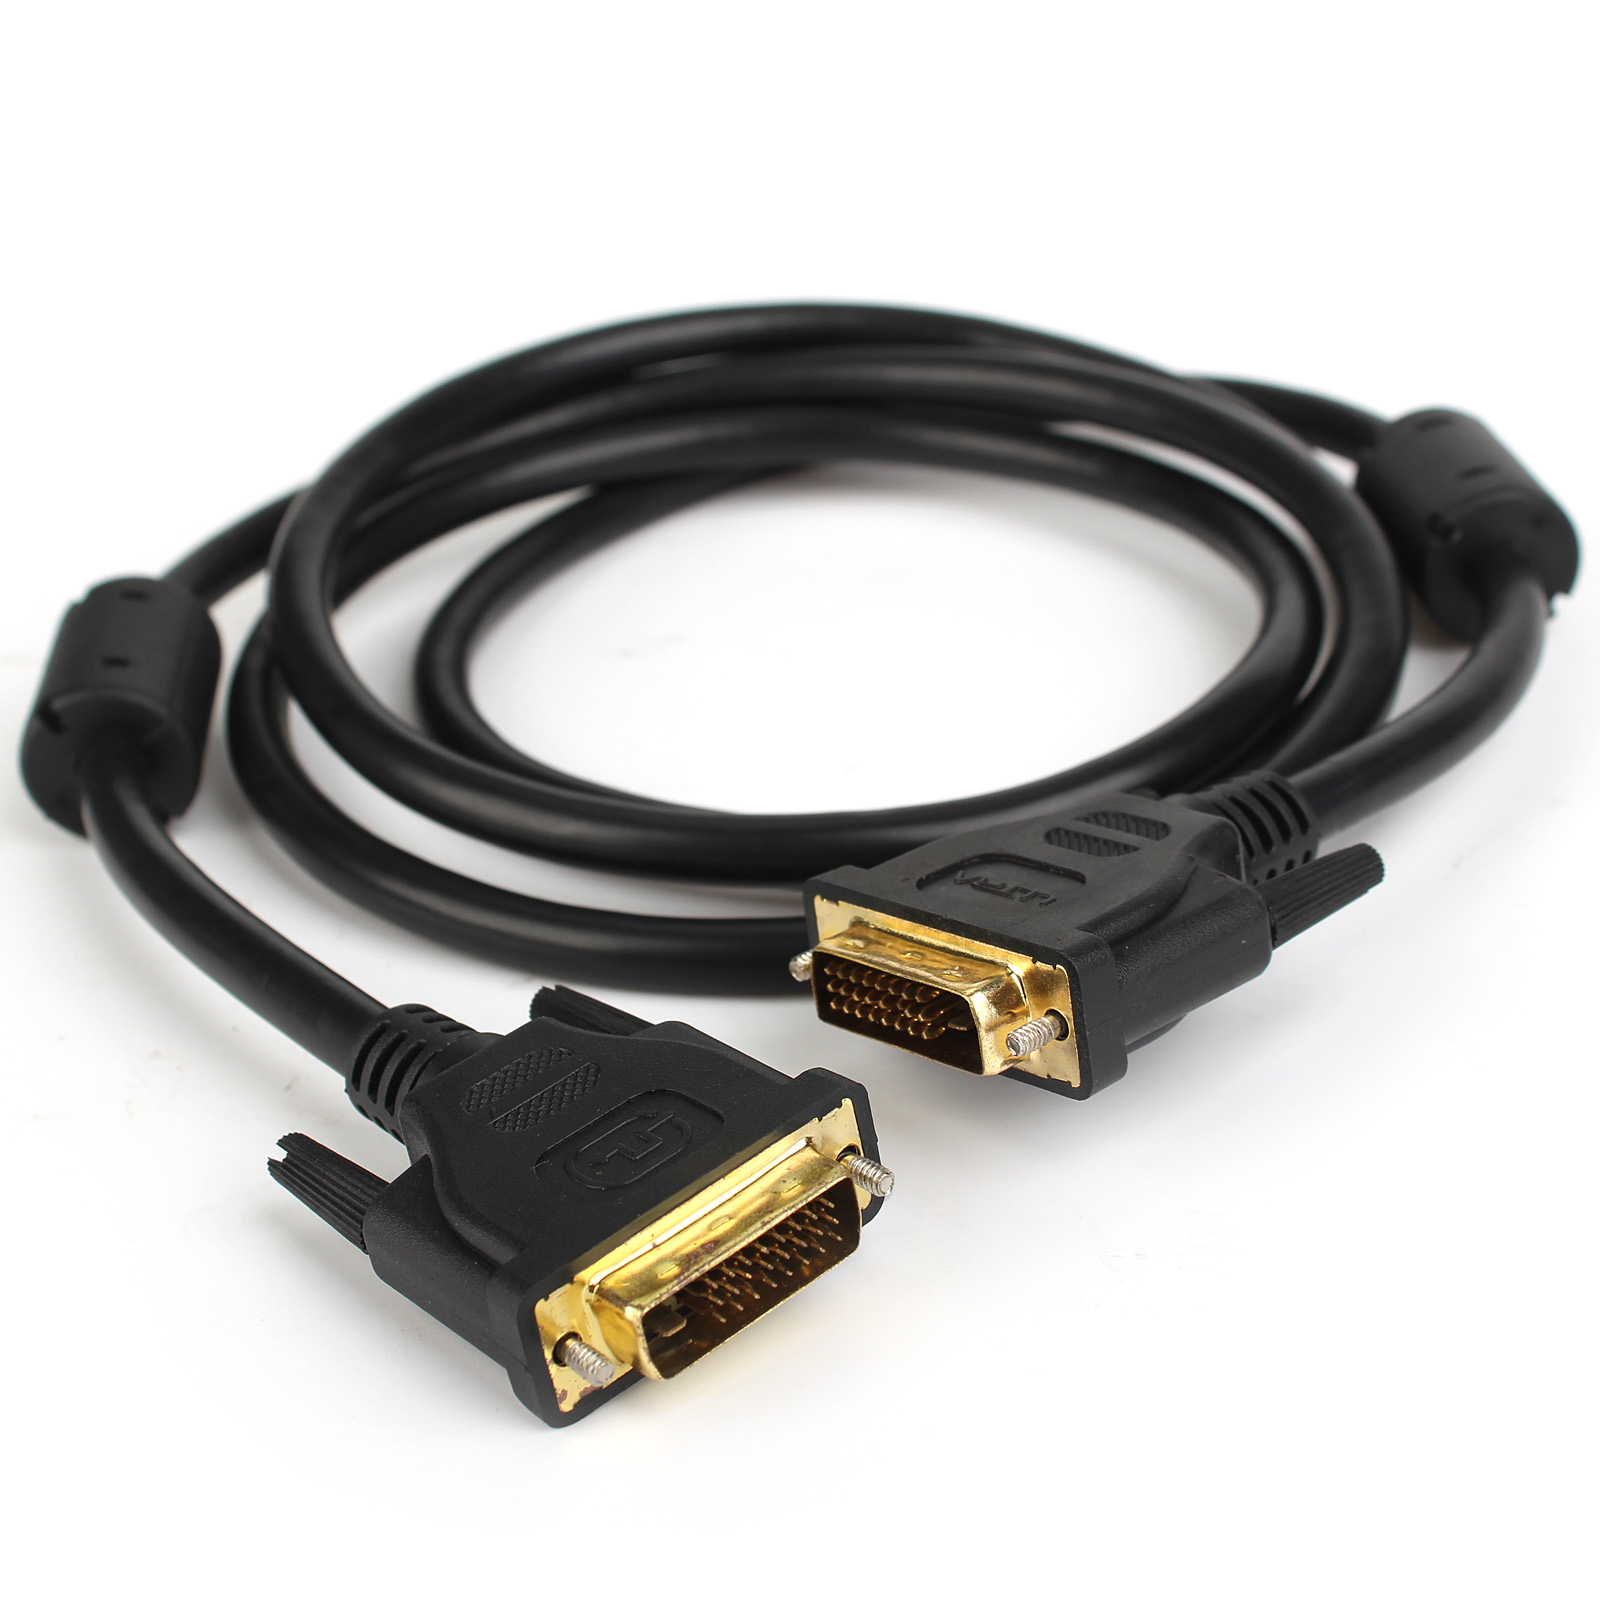 Lot of 2 DVI-D UL-Certified Dual Link 10 FT 28AWG Digital Monitor Cable M//M